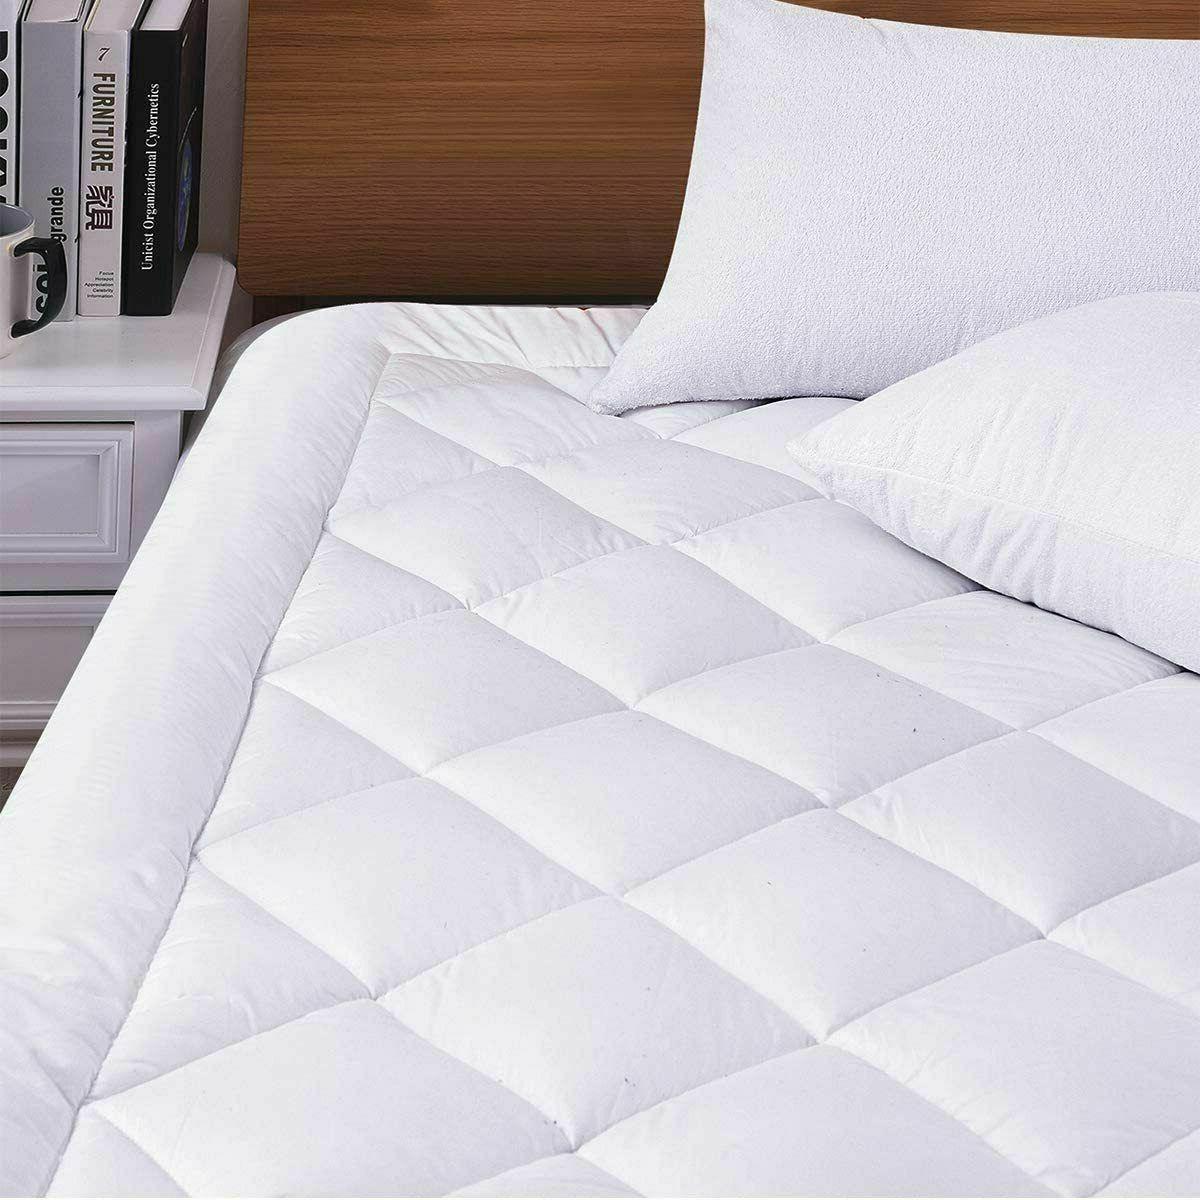 Pillow Top King Size Mattress Topper Hypoallergenic Cooling